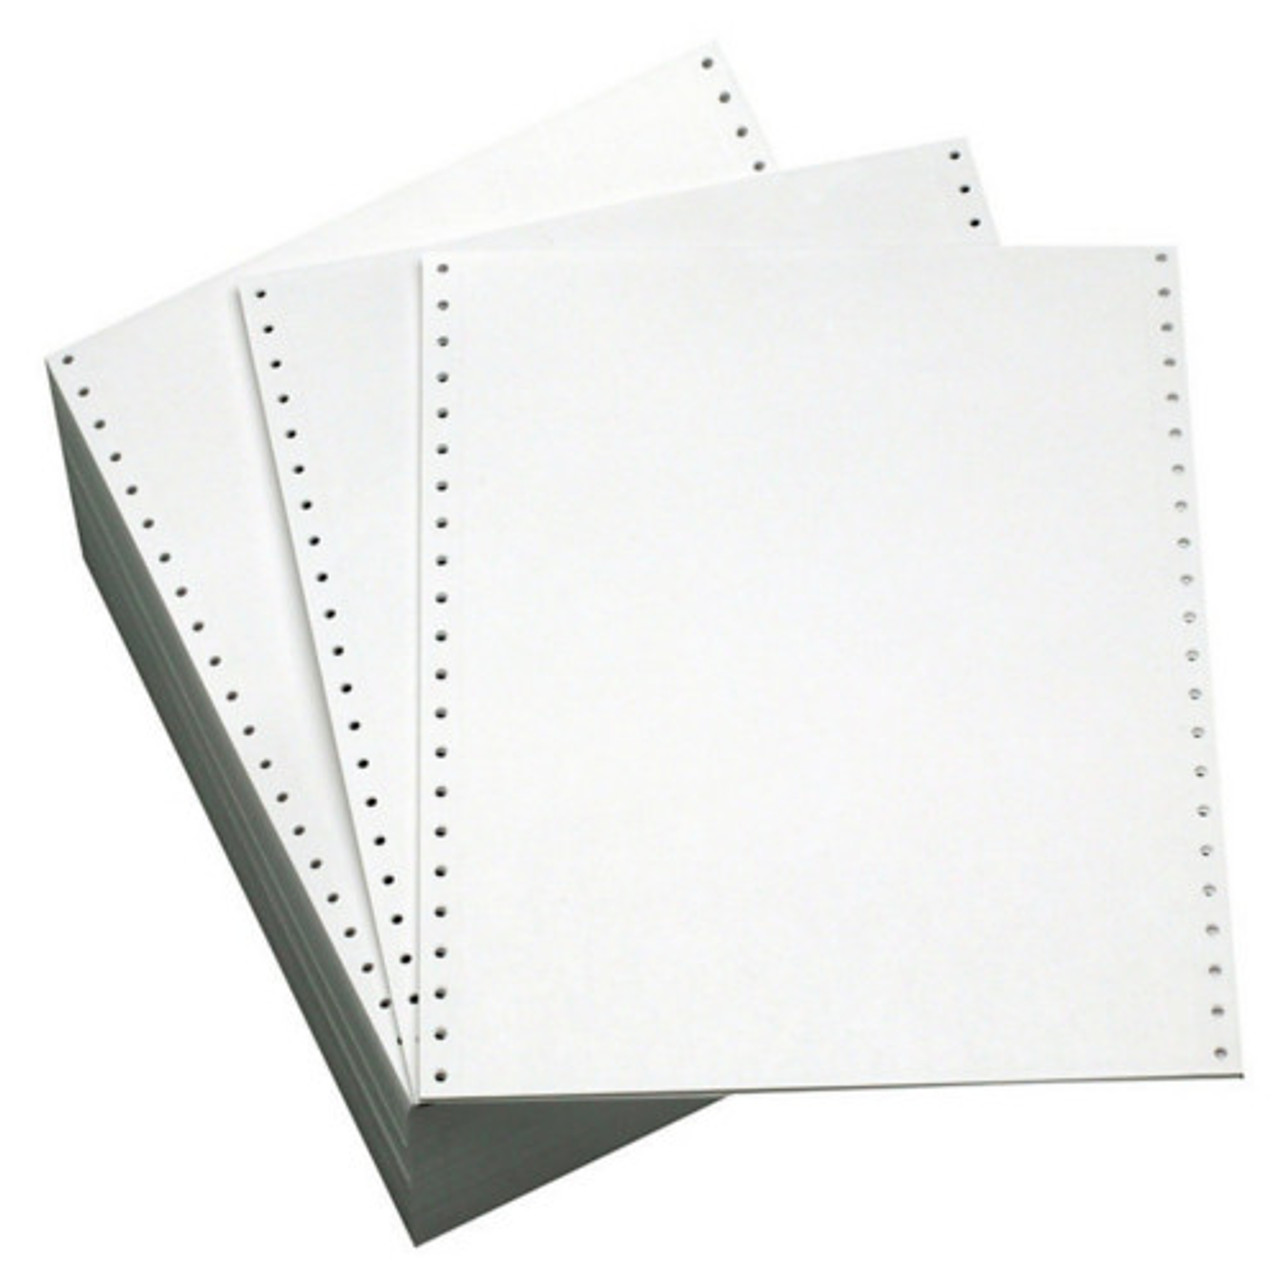 Staples Fanfold Paper, 9.5 x 11, Blank White - 1000 sheets